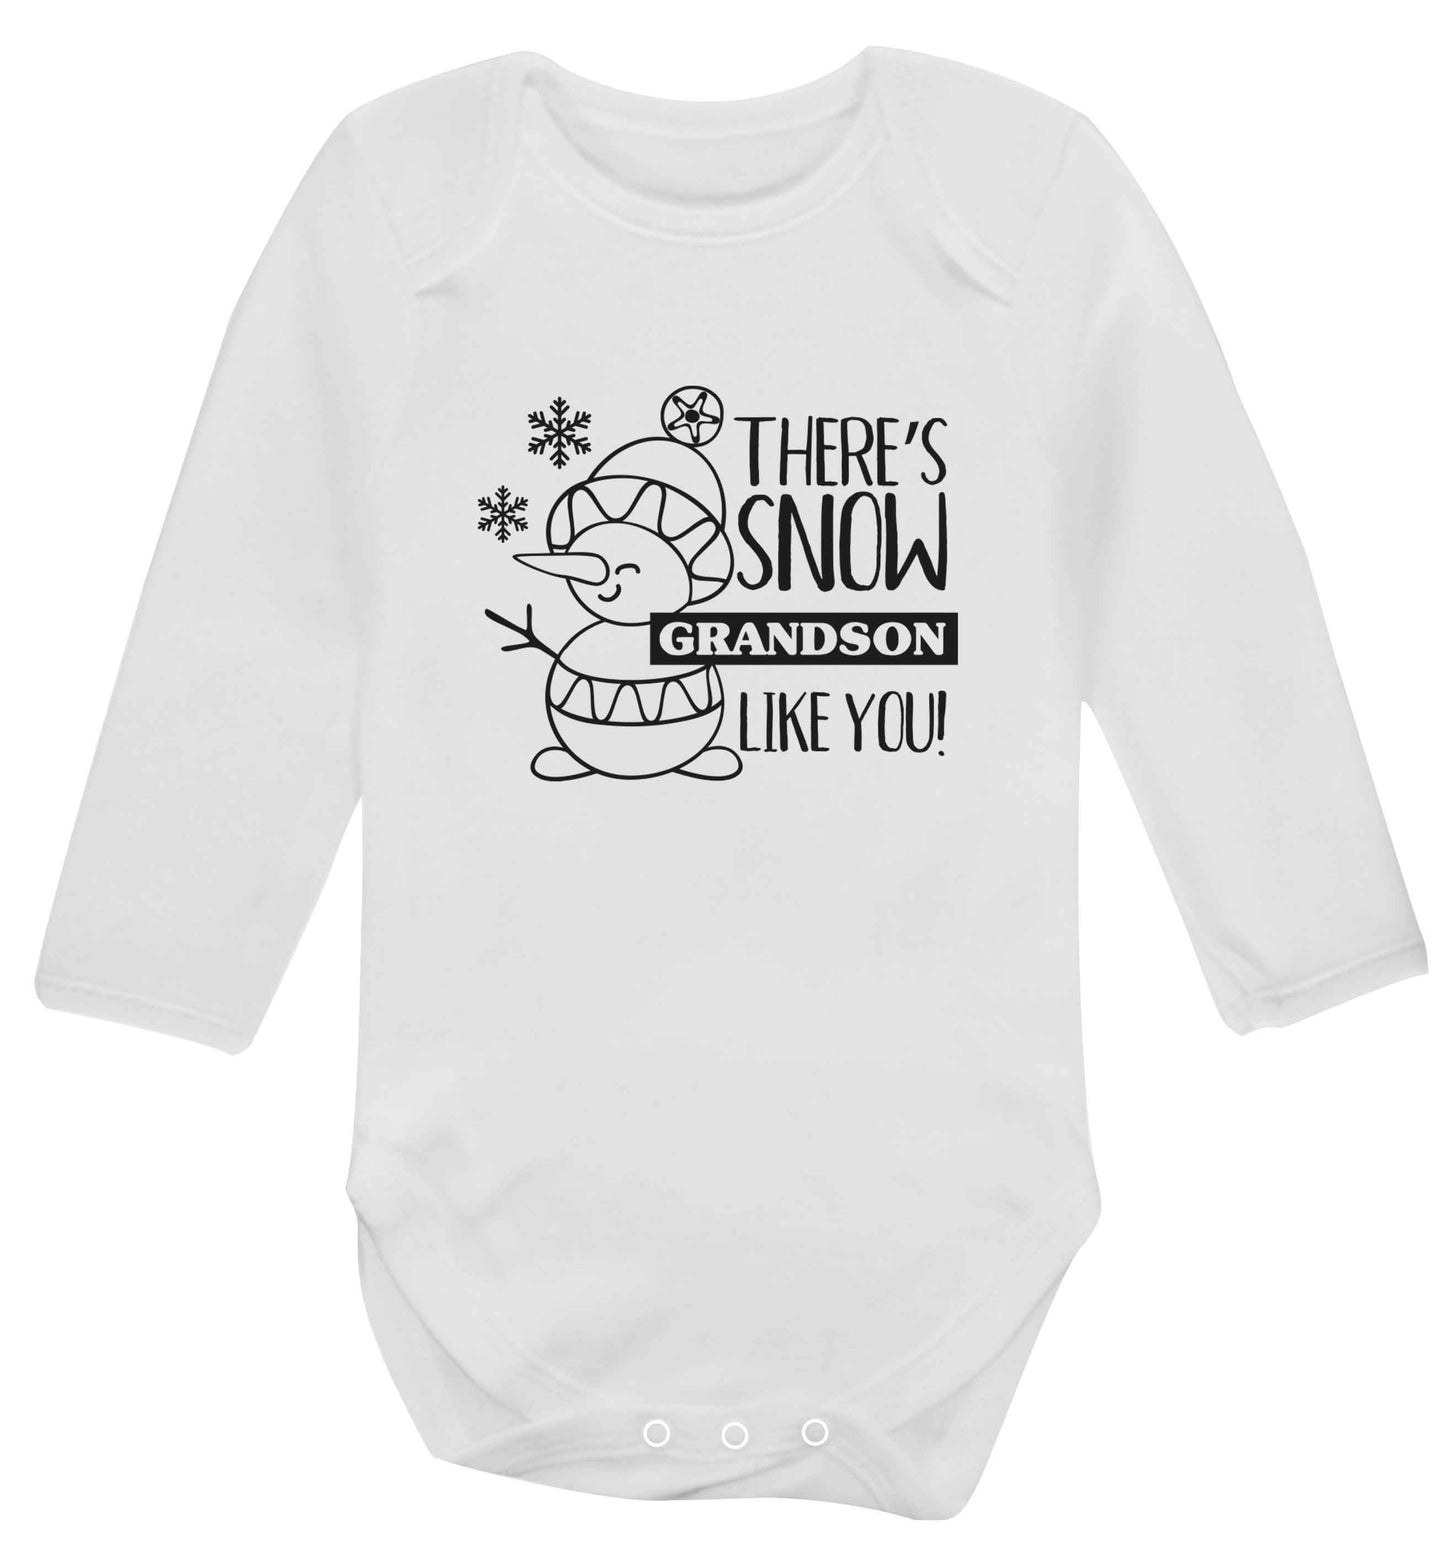 There's snow grandson like you baby vest long sleeved white 6-12 months